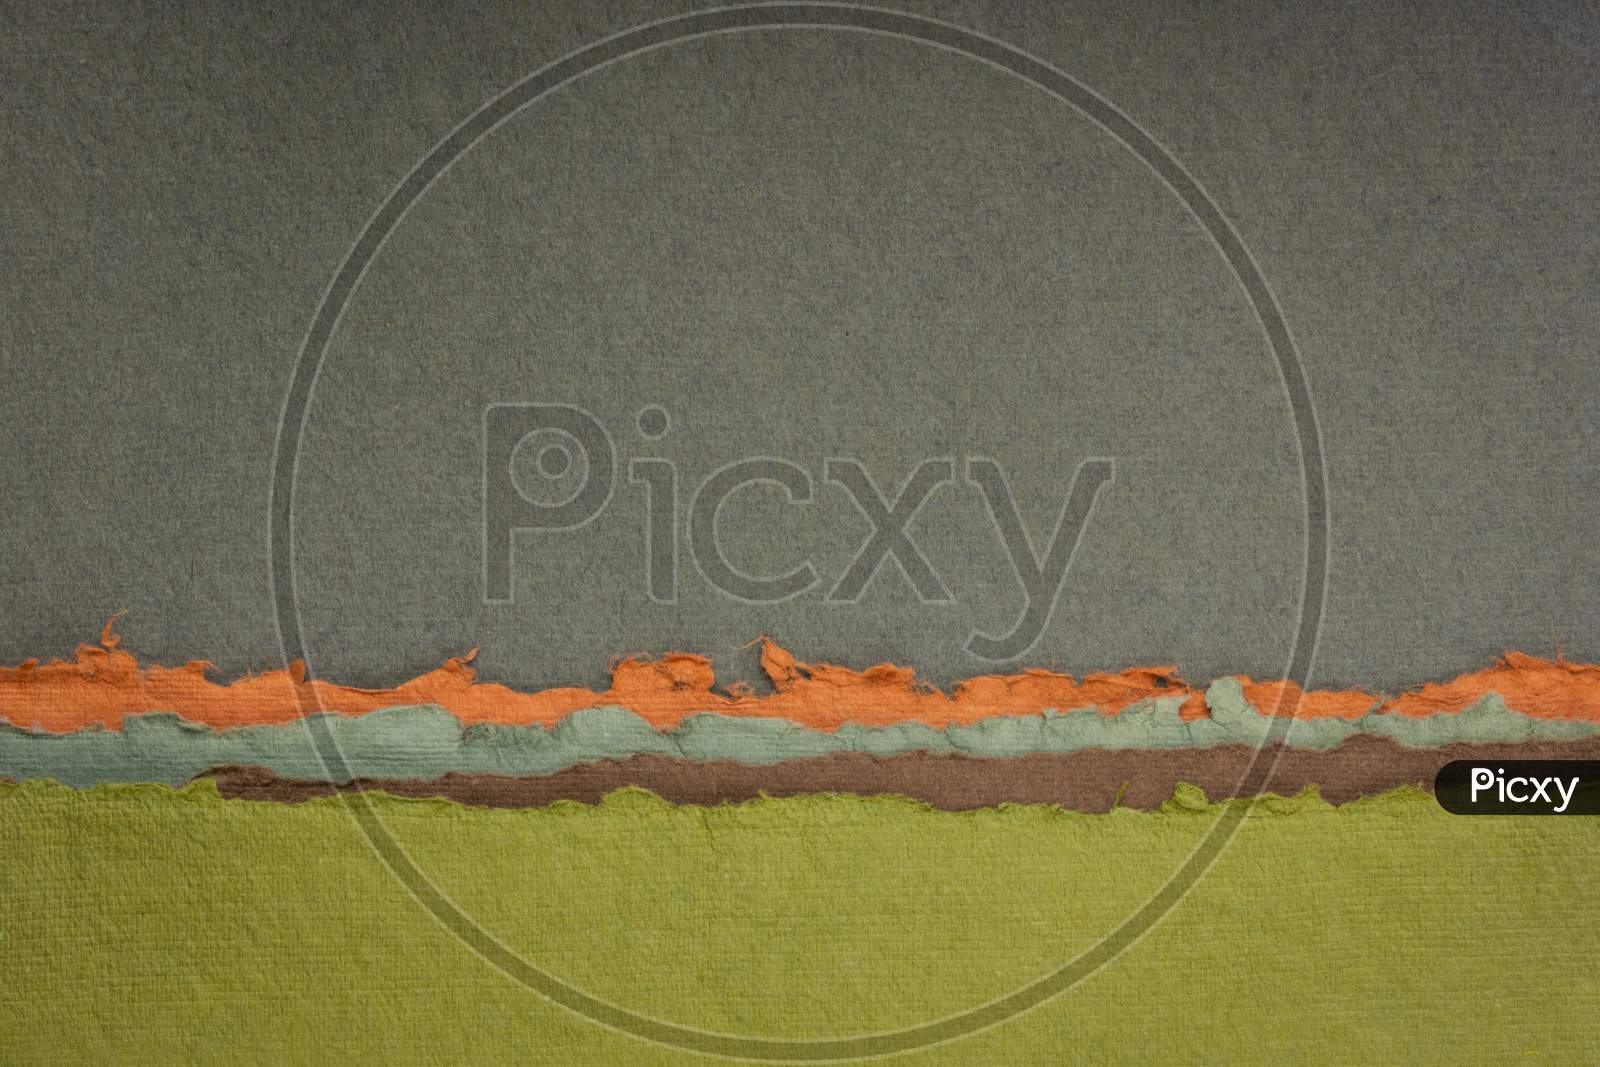 Abstract Landscape In Green, Brown And Orange Tones - A Collection Of Colorful Handmade Indian Papers Produced From Recycled Cotton Fabric